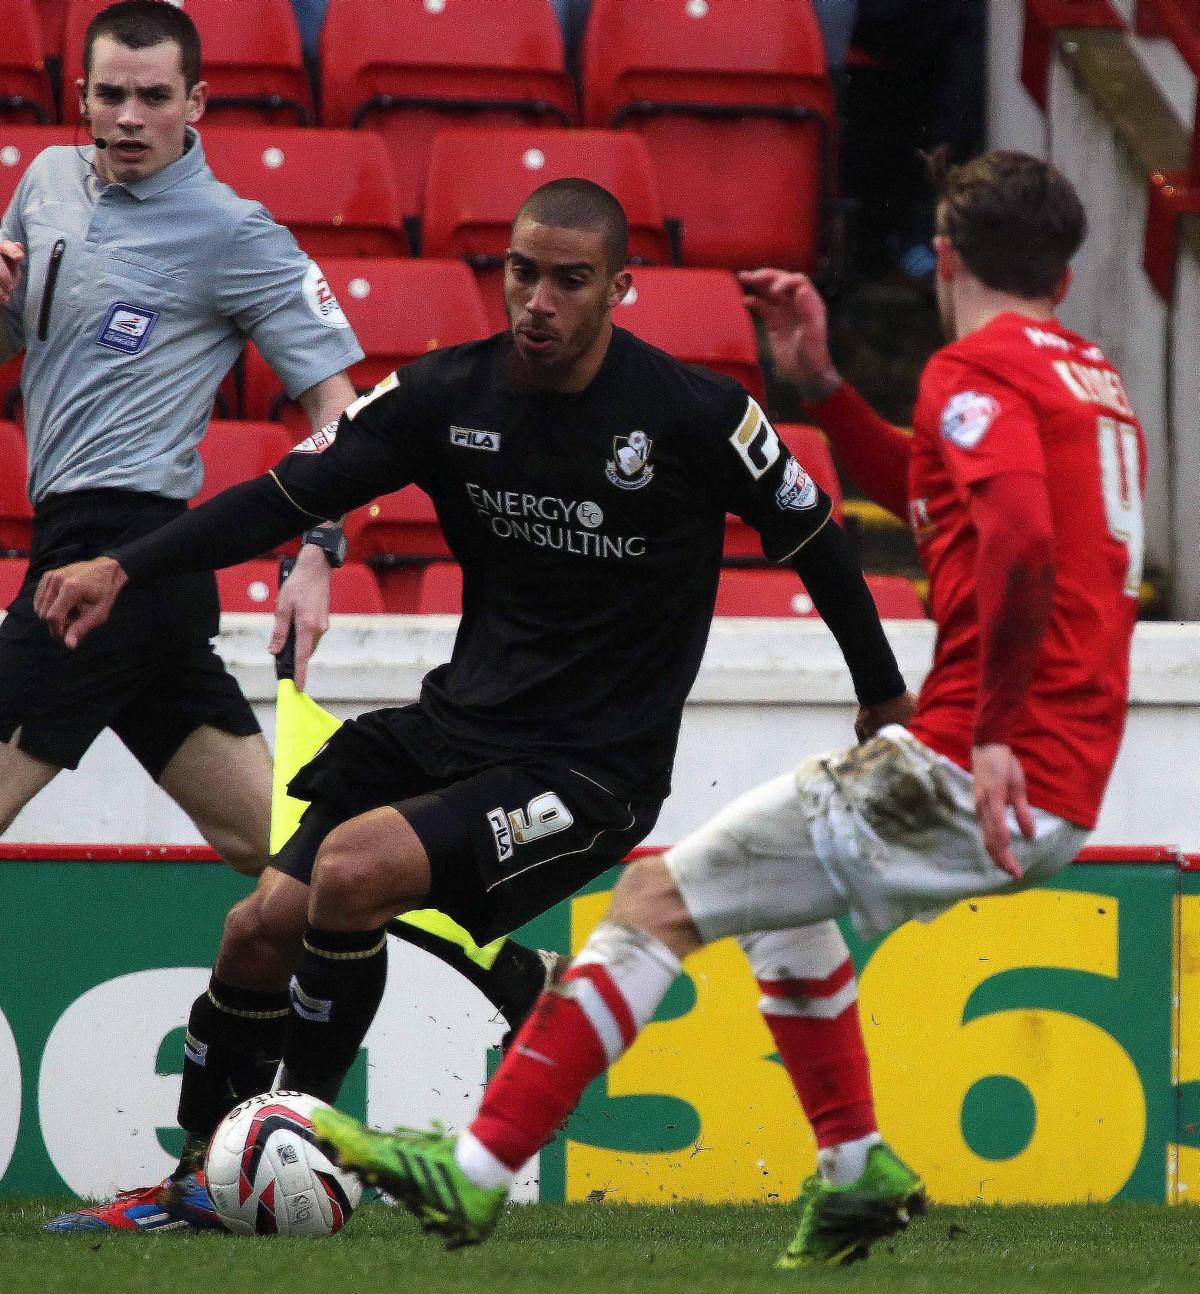 Barnsley v AFC Bournemouth at the Oakwell stadium on Saturday, March 22, 2014.